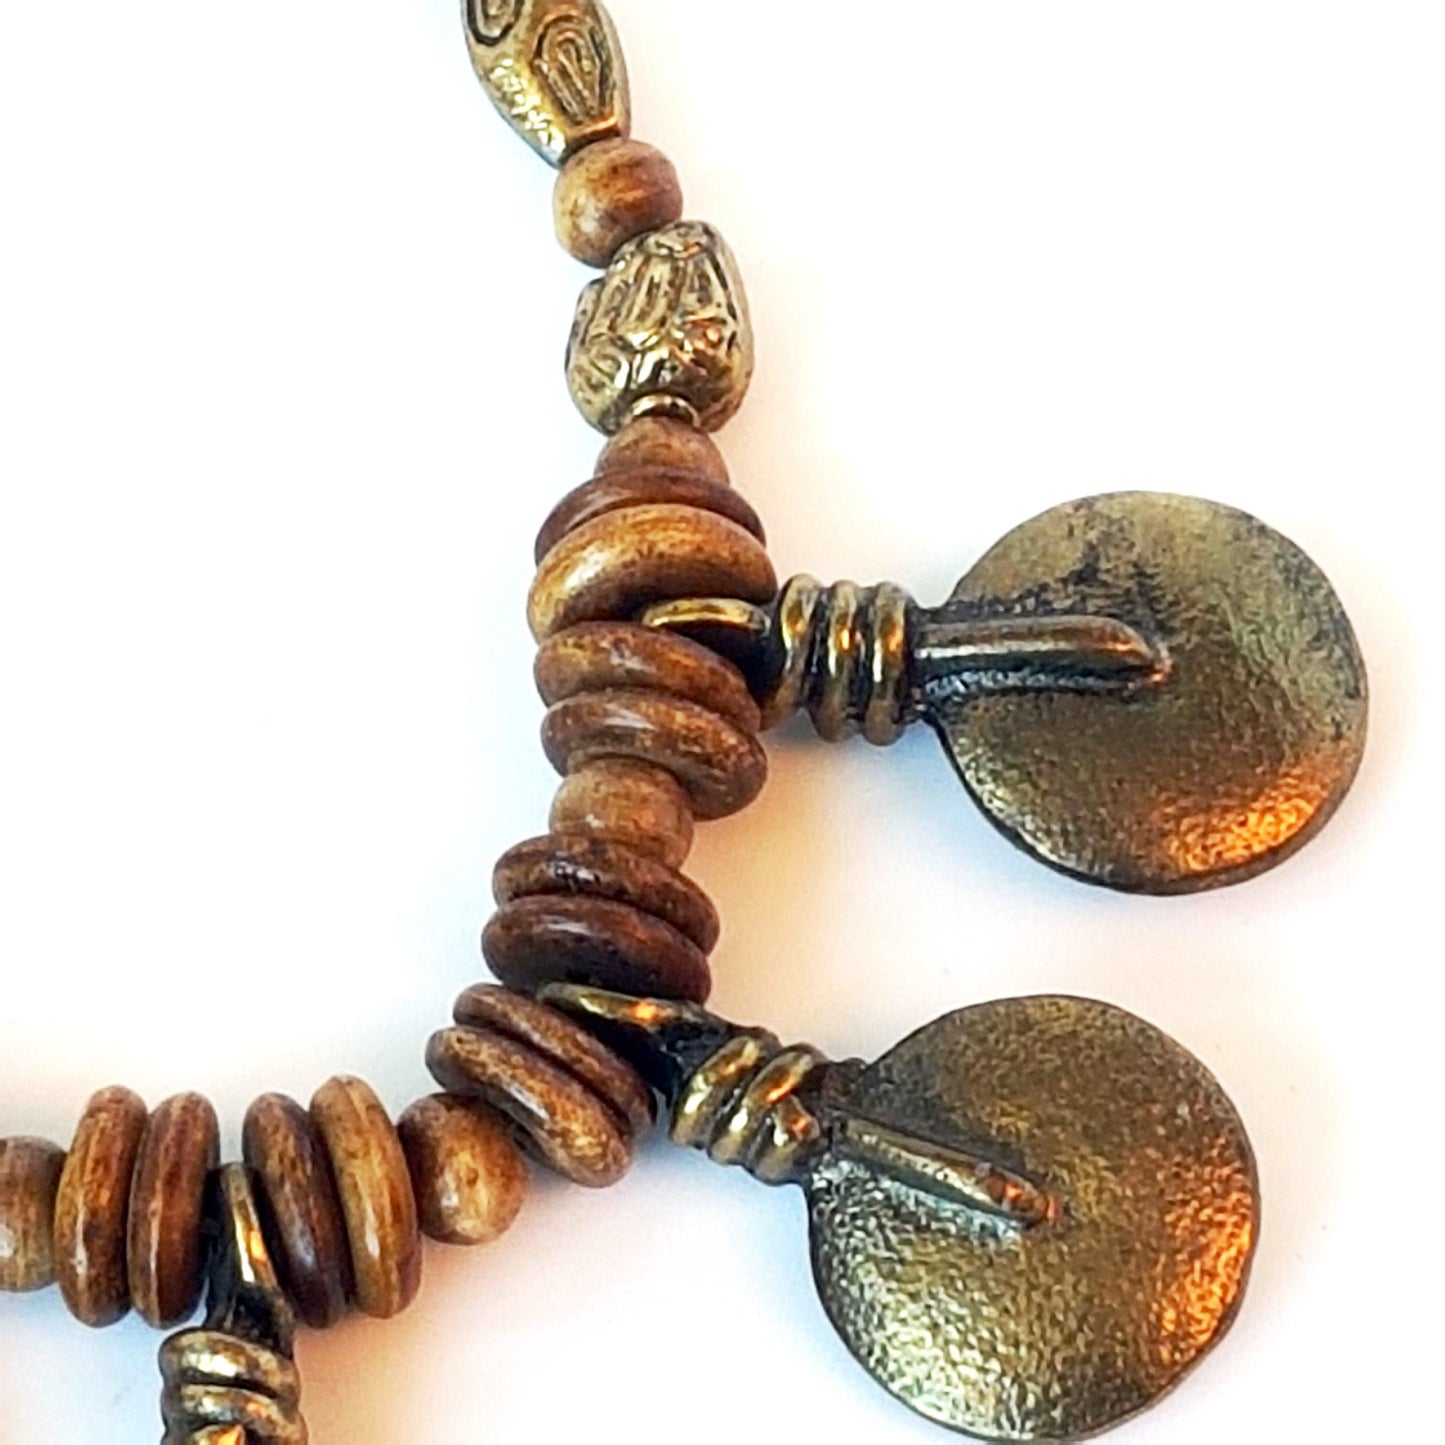 Bronze metal disc pendant necklace with rustic handmade beads.  Classic old world tribal design 19 inches long. Versatile casual to dressy.